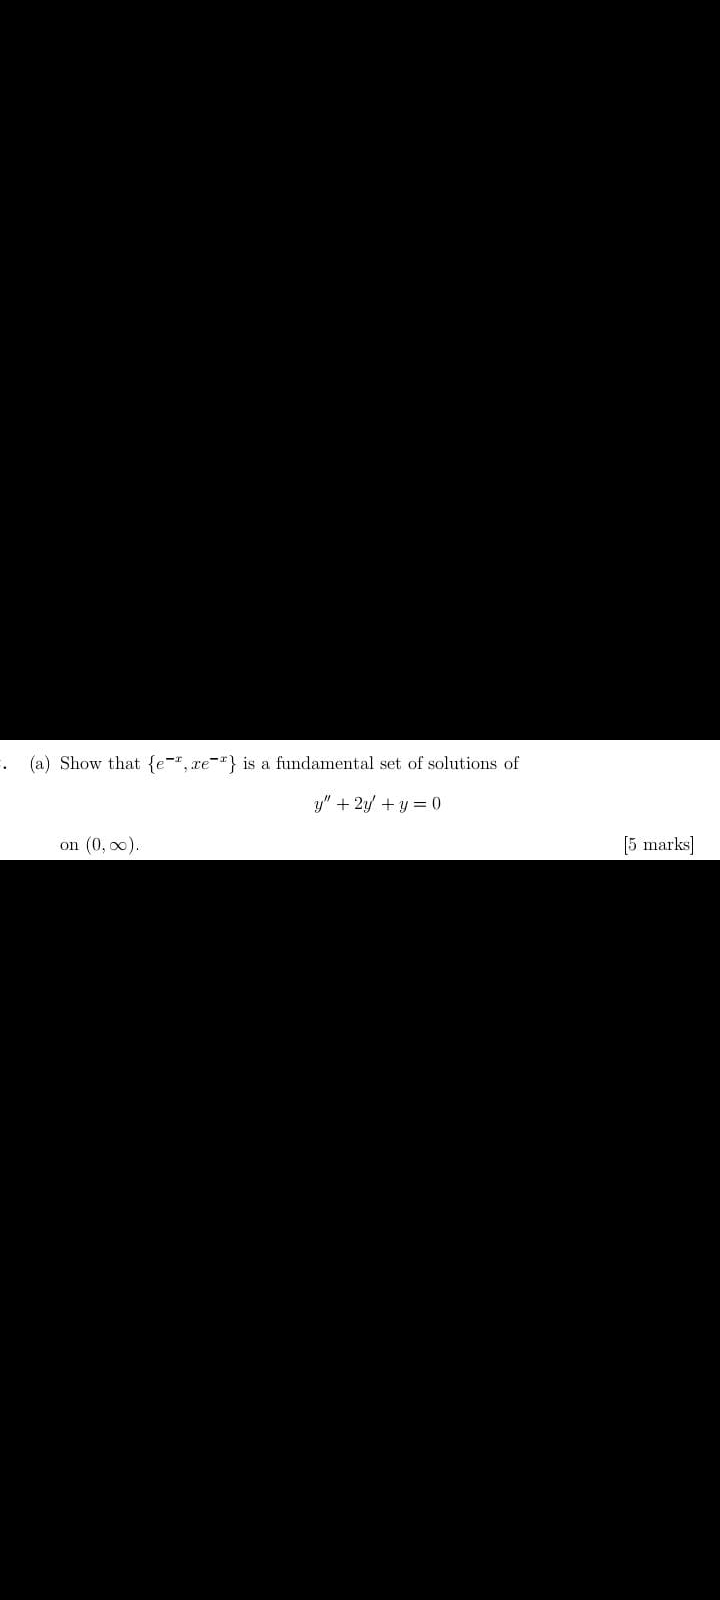 (a) Show that {e-", re-"} is a fundamental set of solutions of
y" + 2y/ + y = 0
on (0, o0).
[5 marks]
